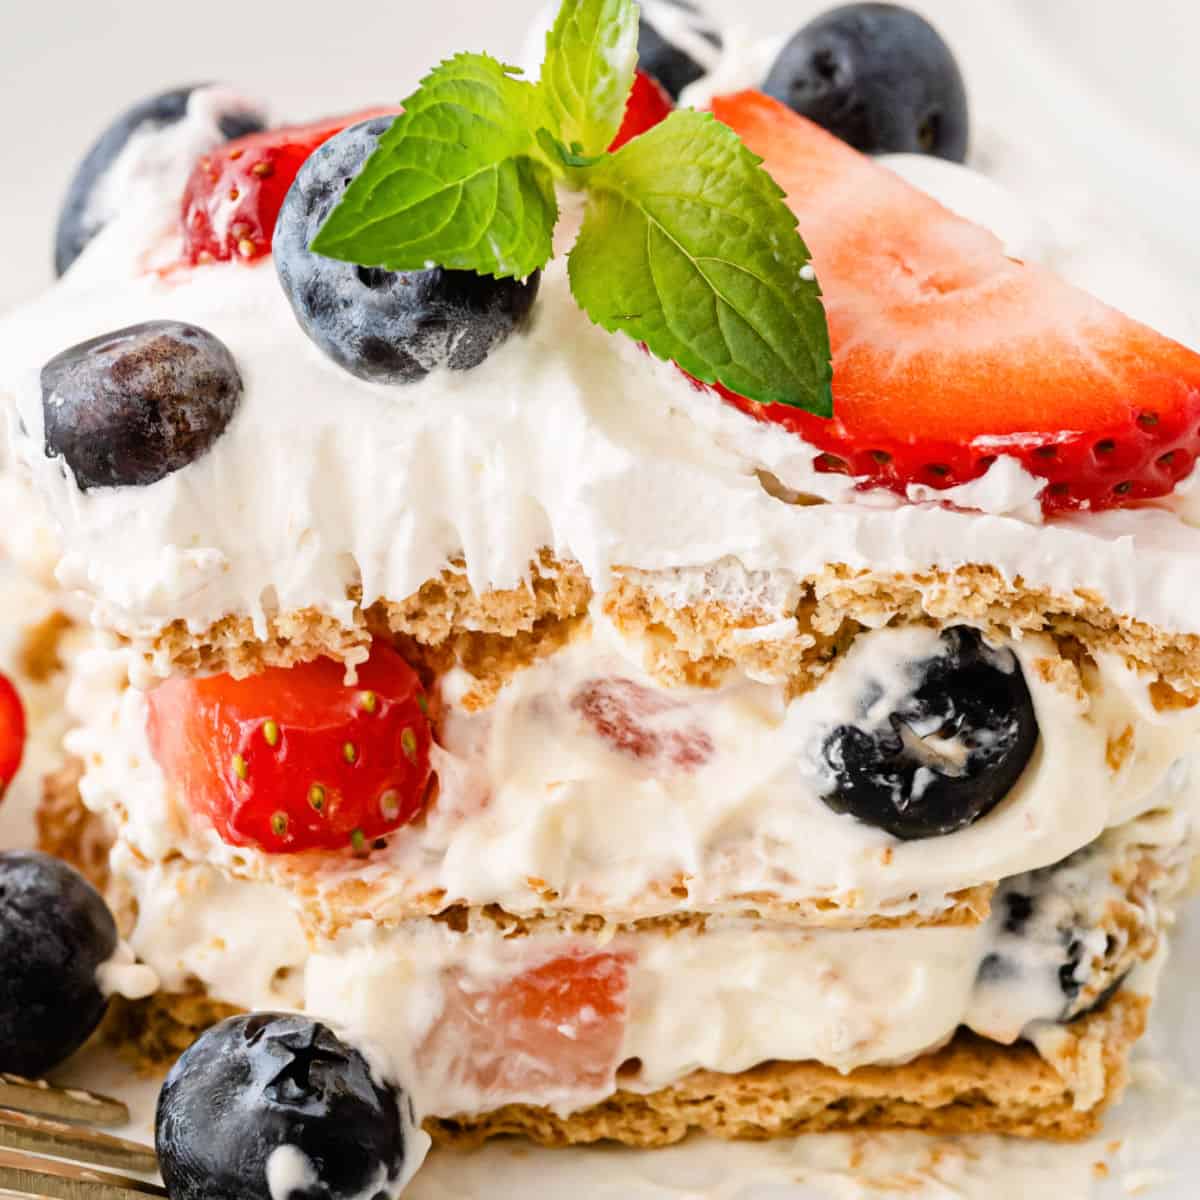 squar eimafe of a berry icebox cake slice with a sprig of mint on top